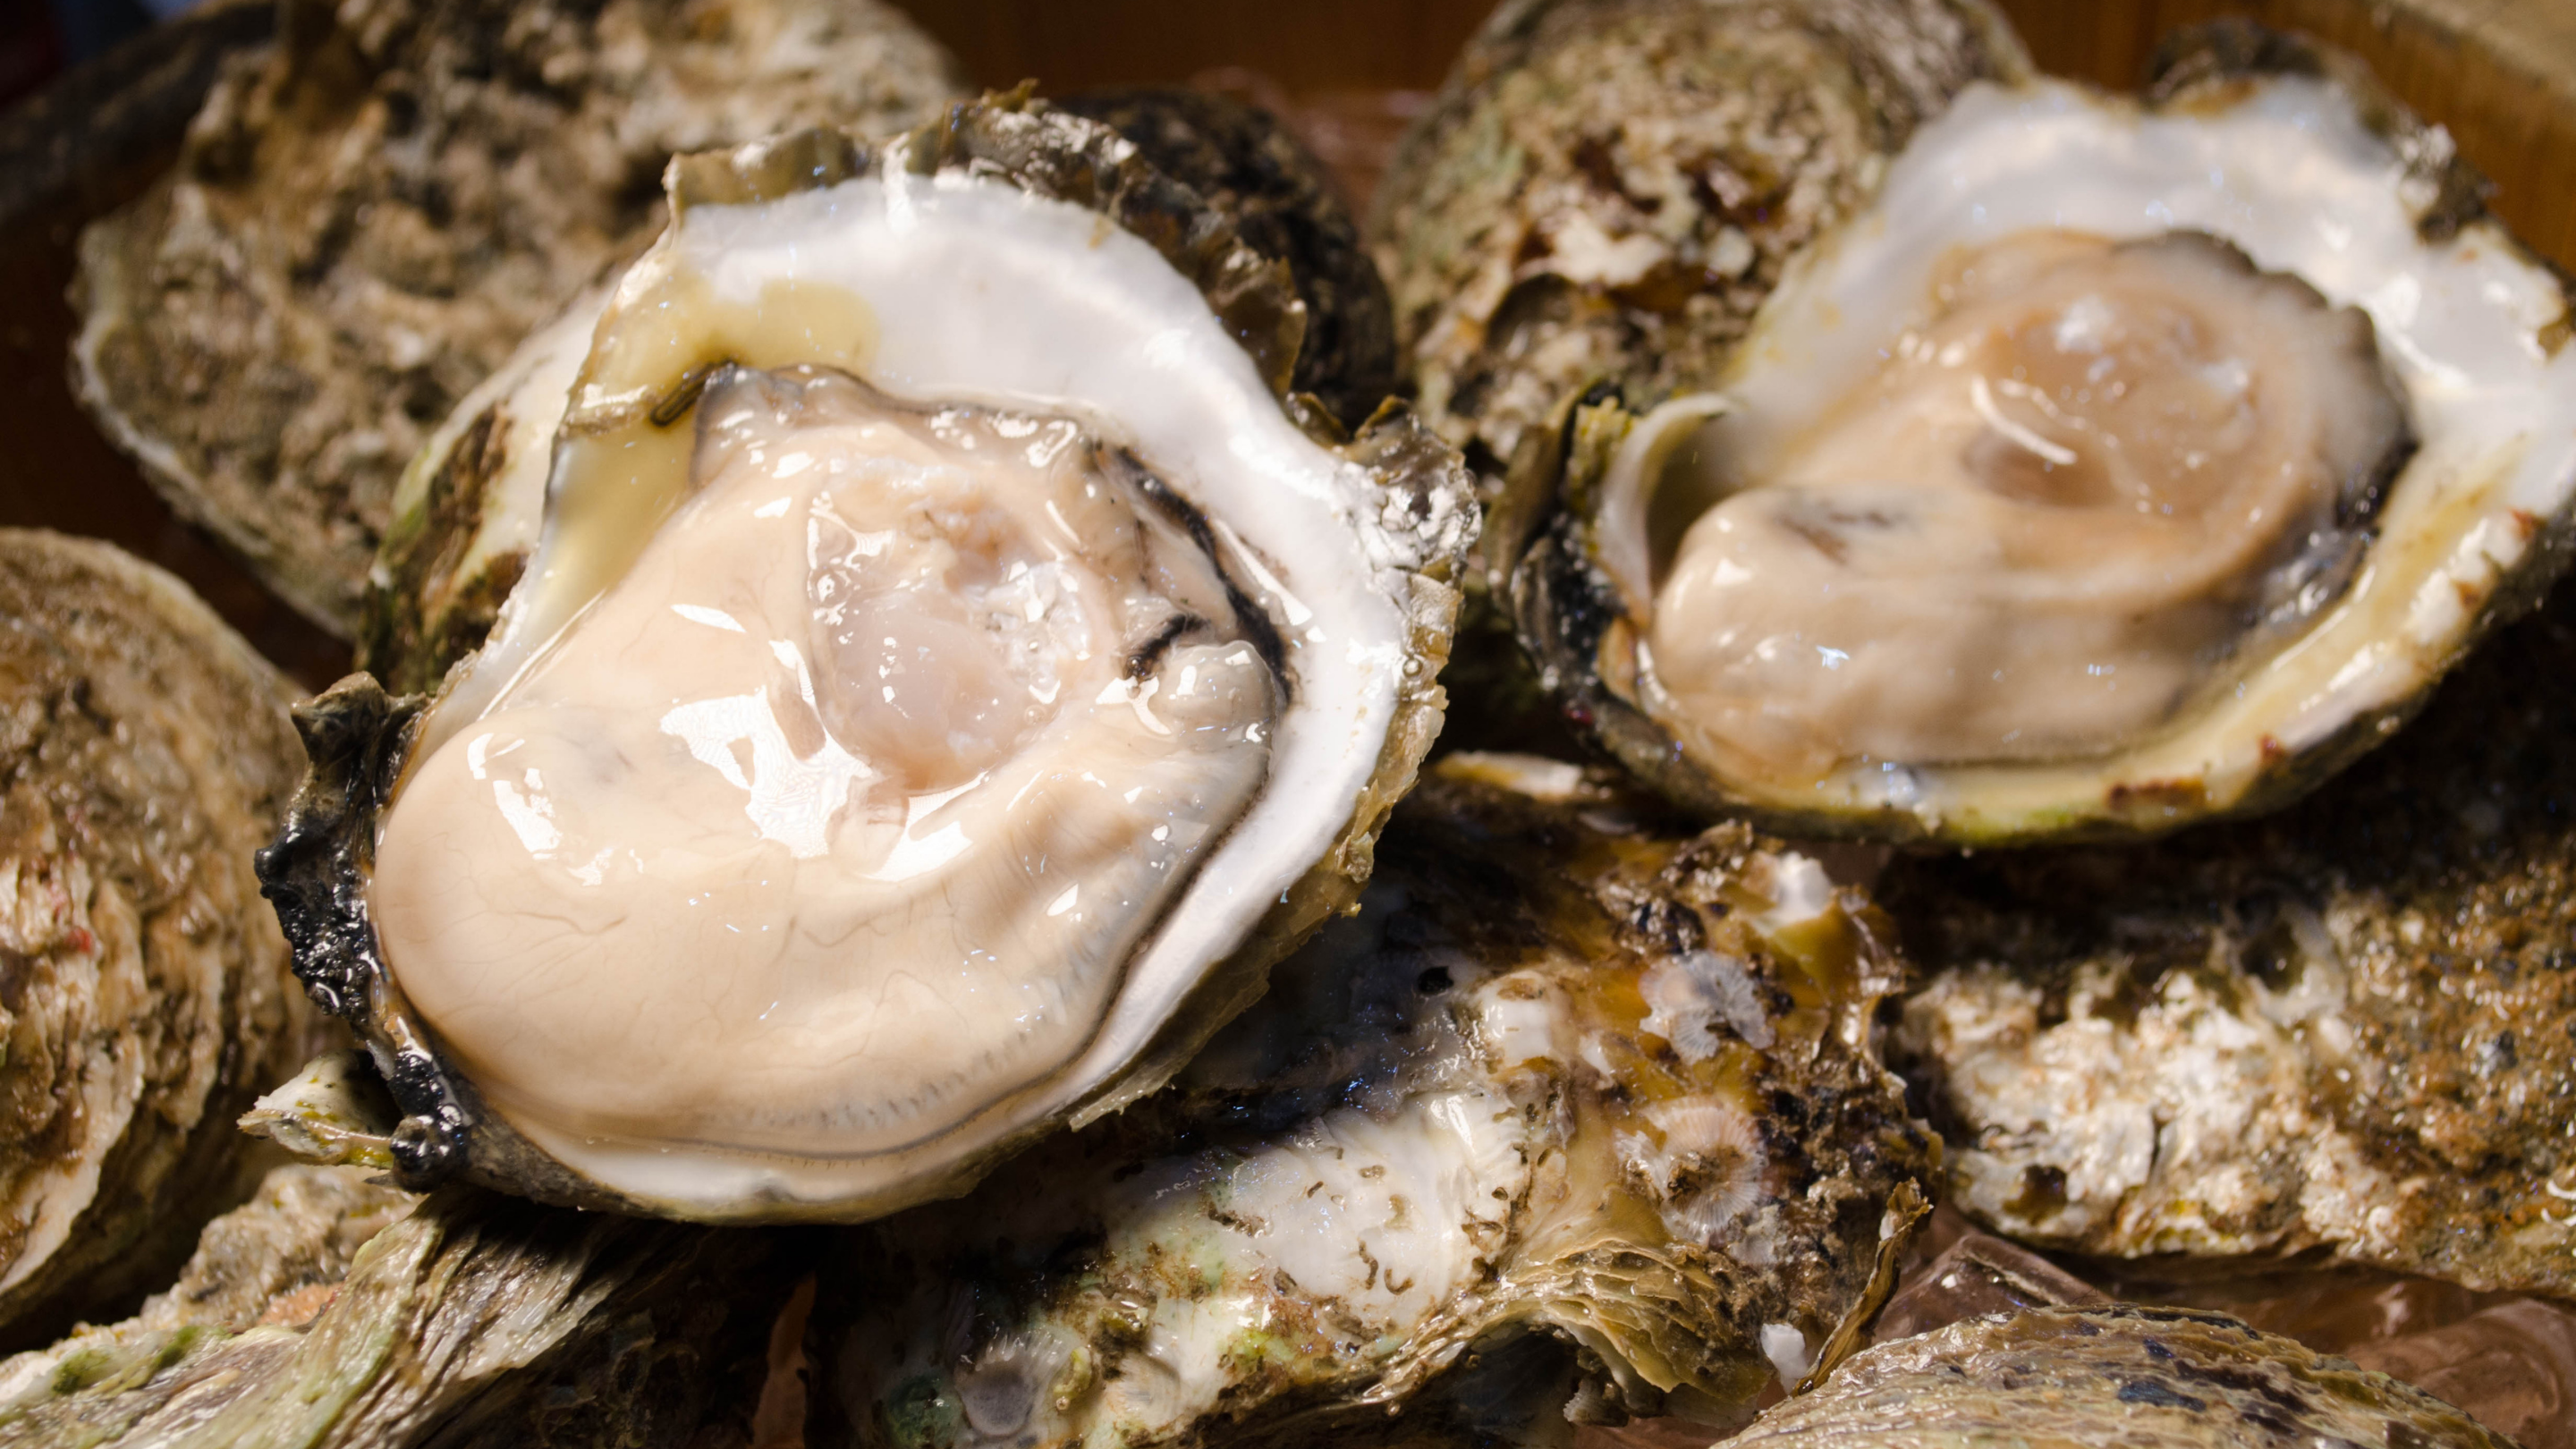 Missouri Man Dies Of Flesh Eating Bacteria After Eating Raw Oysters